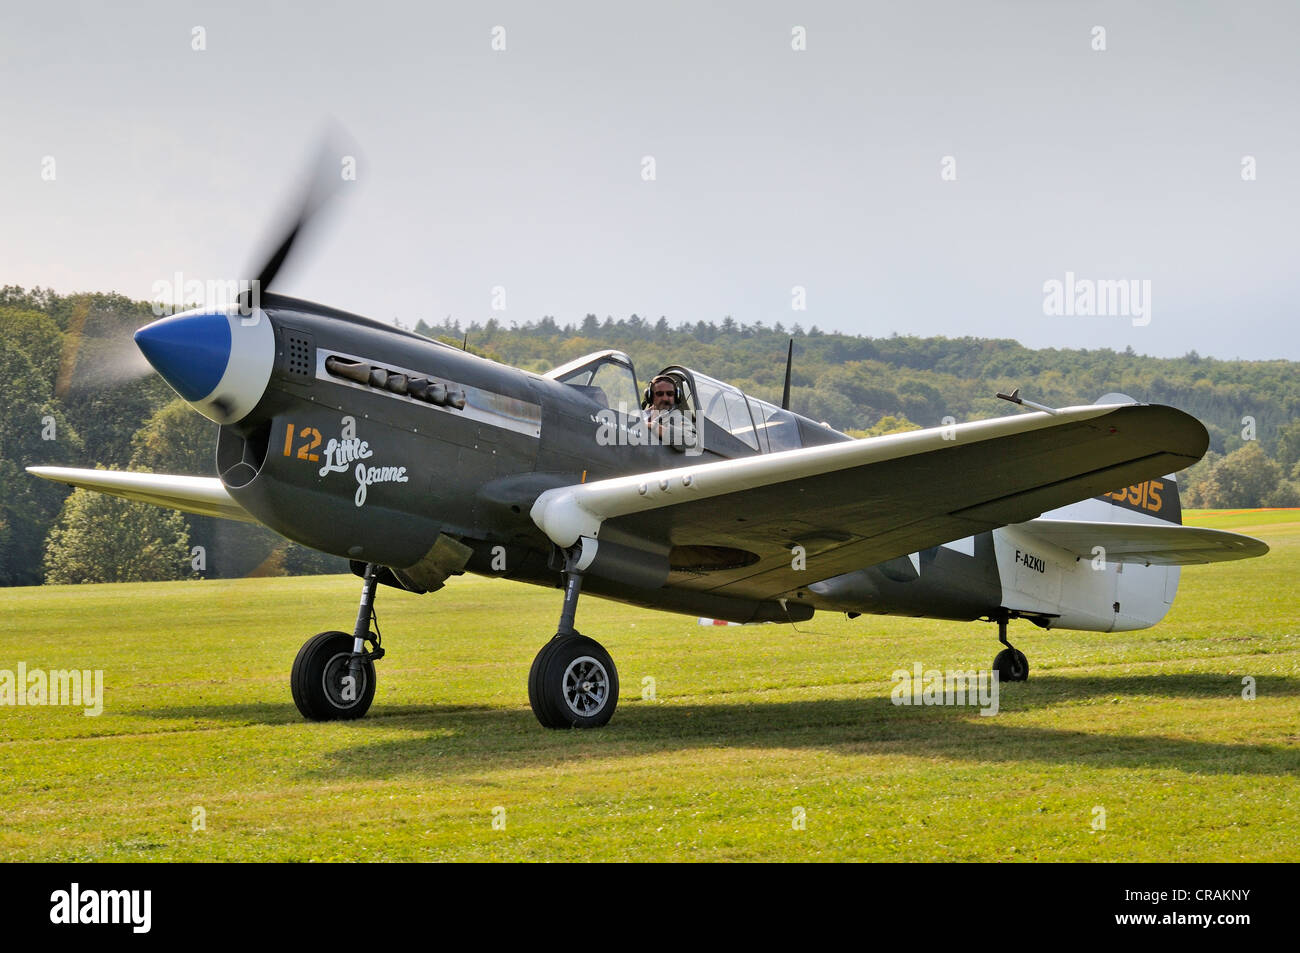 US-American fighter aircraft, Curtiss P-40 Kittyhawk, Europe's largest meeting of vintage aircraft at Hahnweide, Kirchheim-Teck Stock Photo